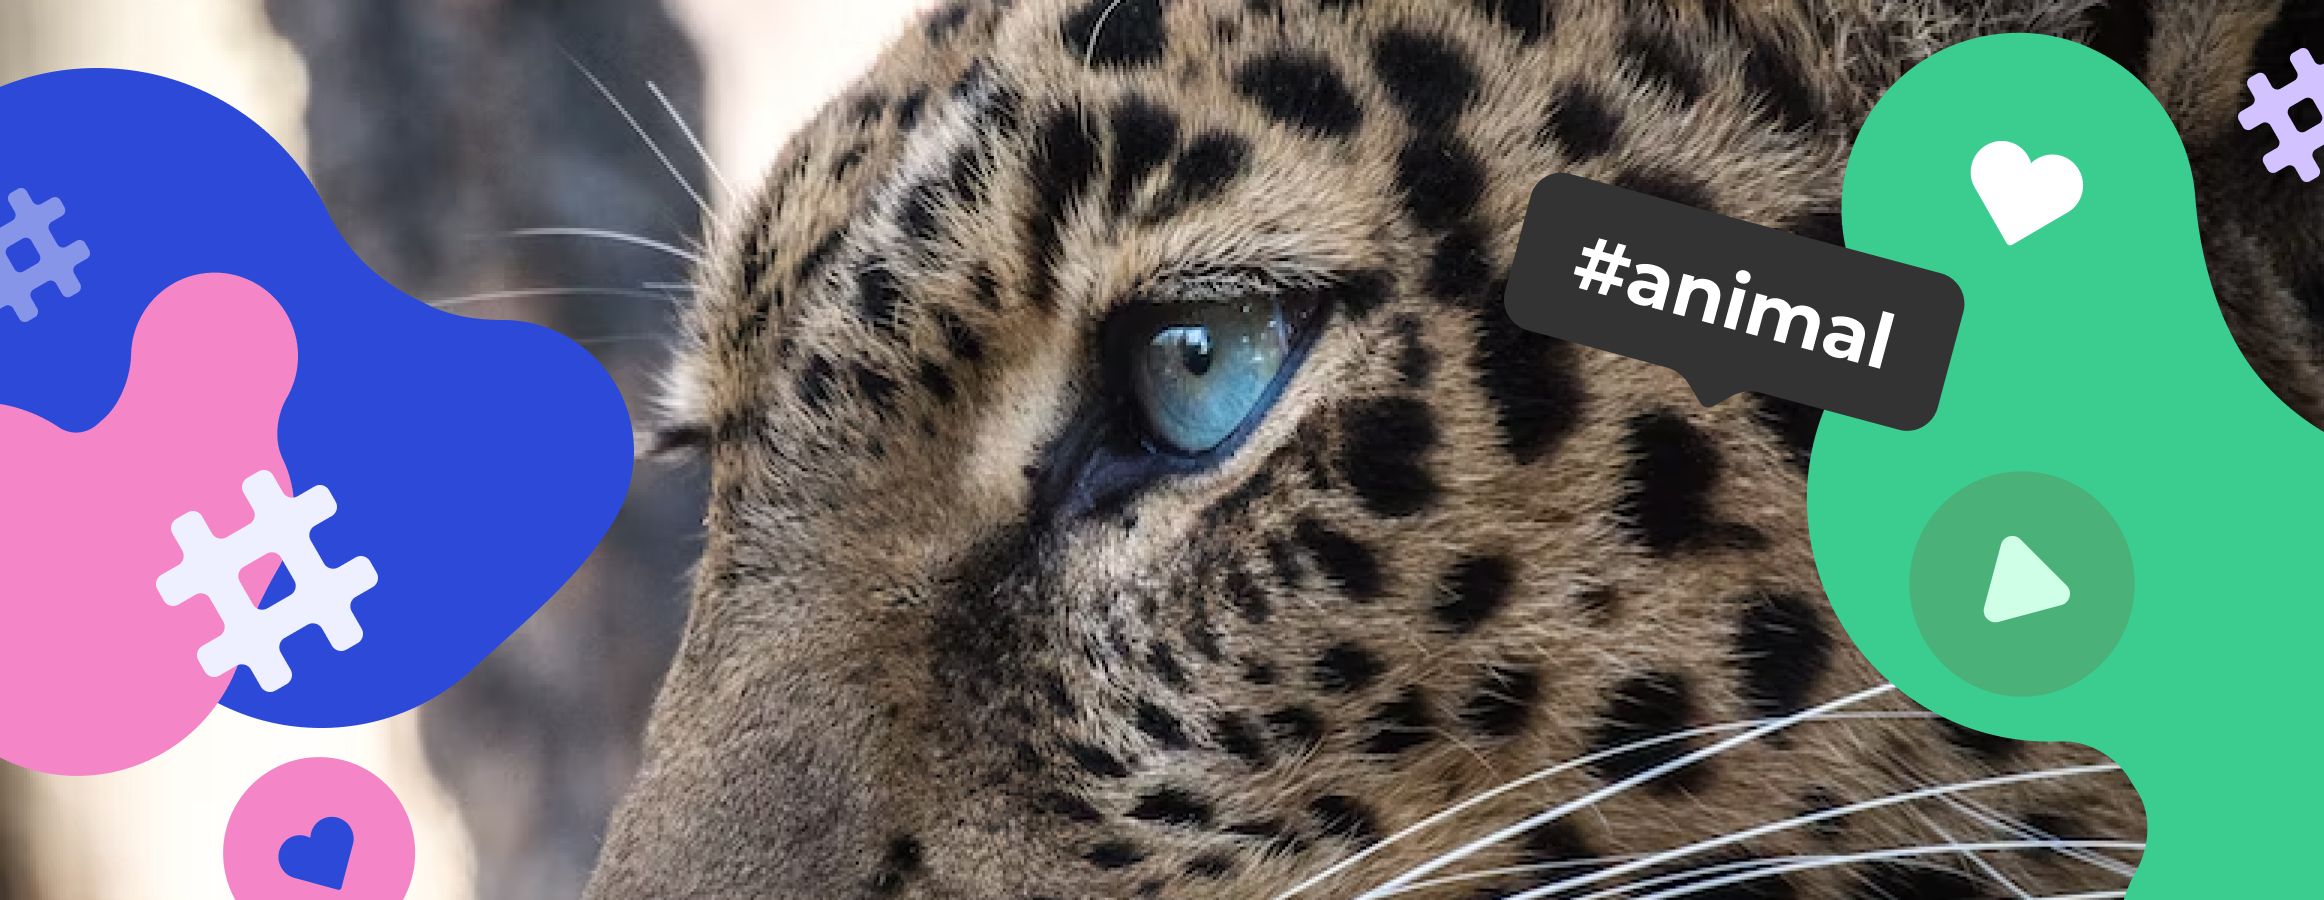 Animal hashtags for Instagram | Inflact